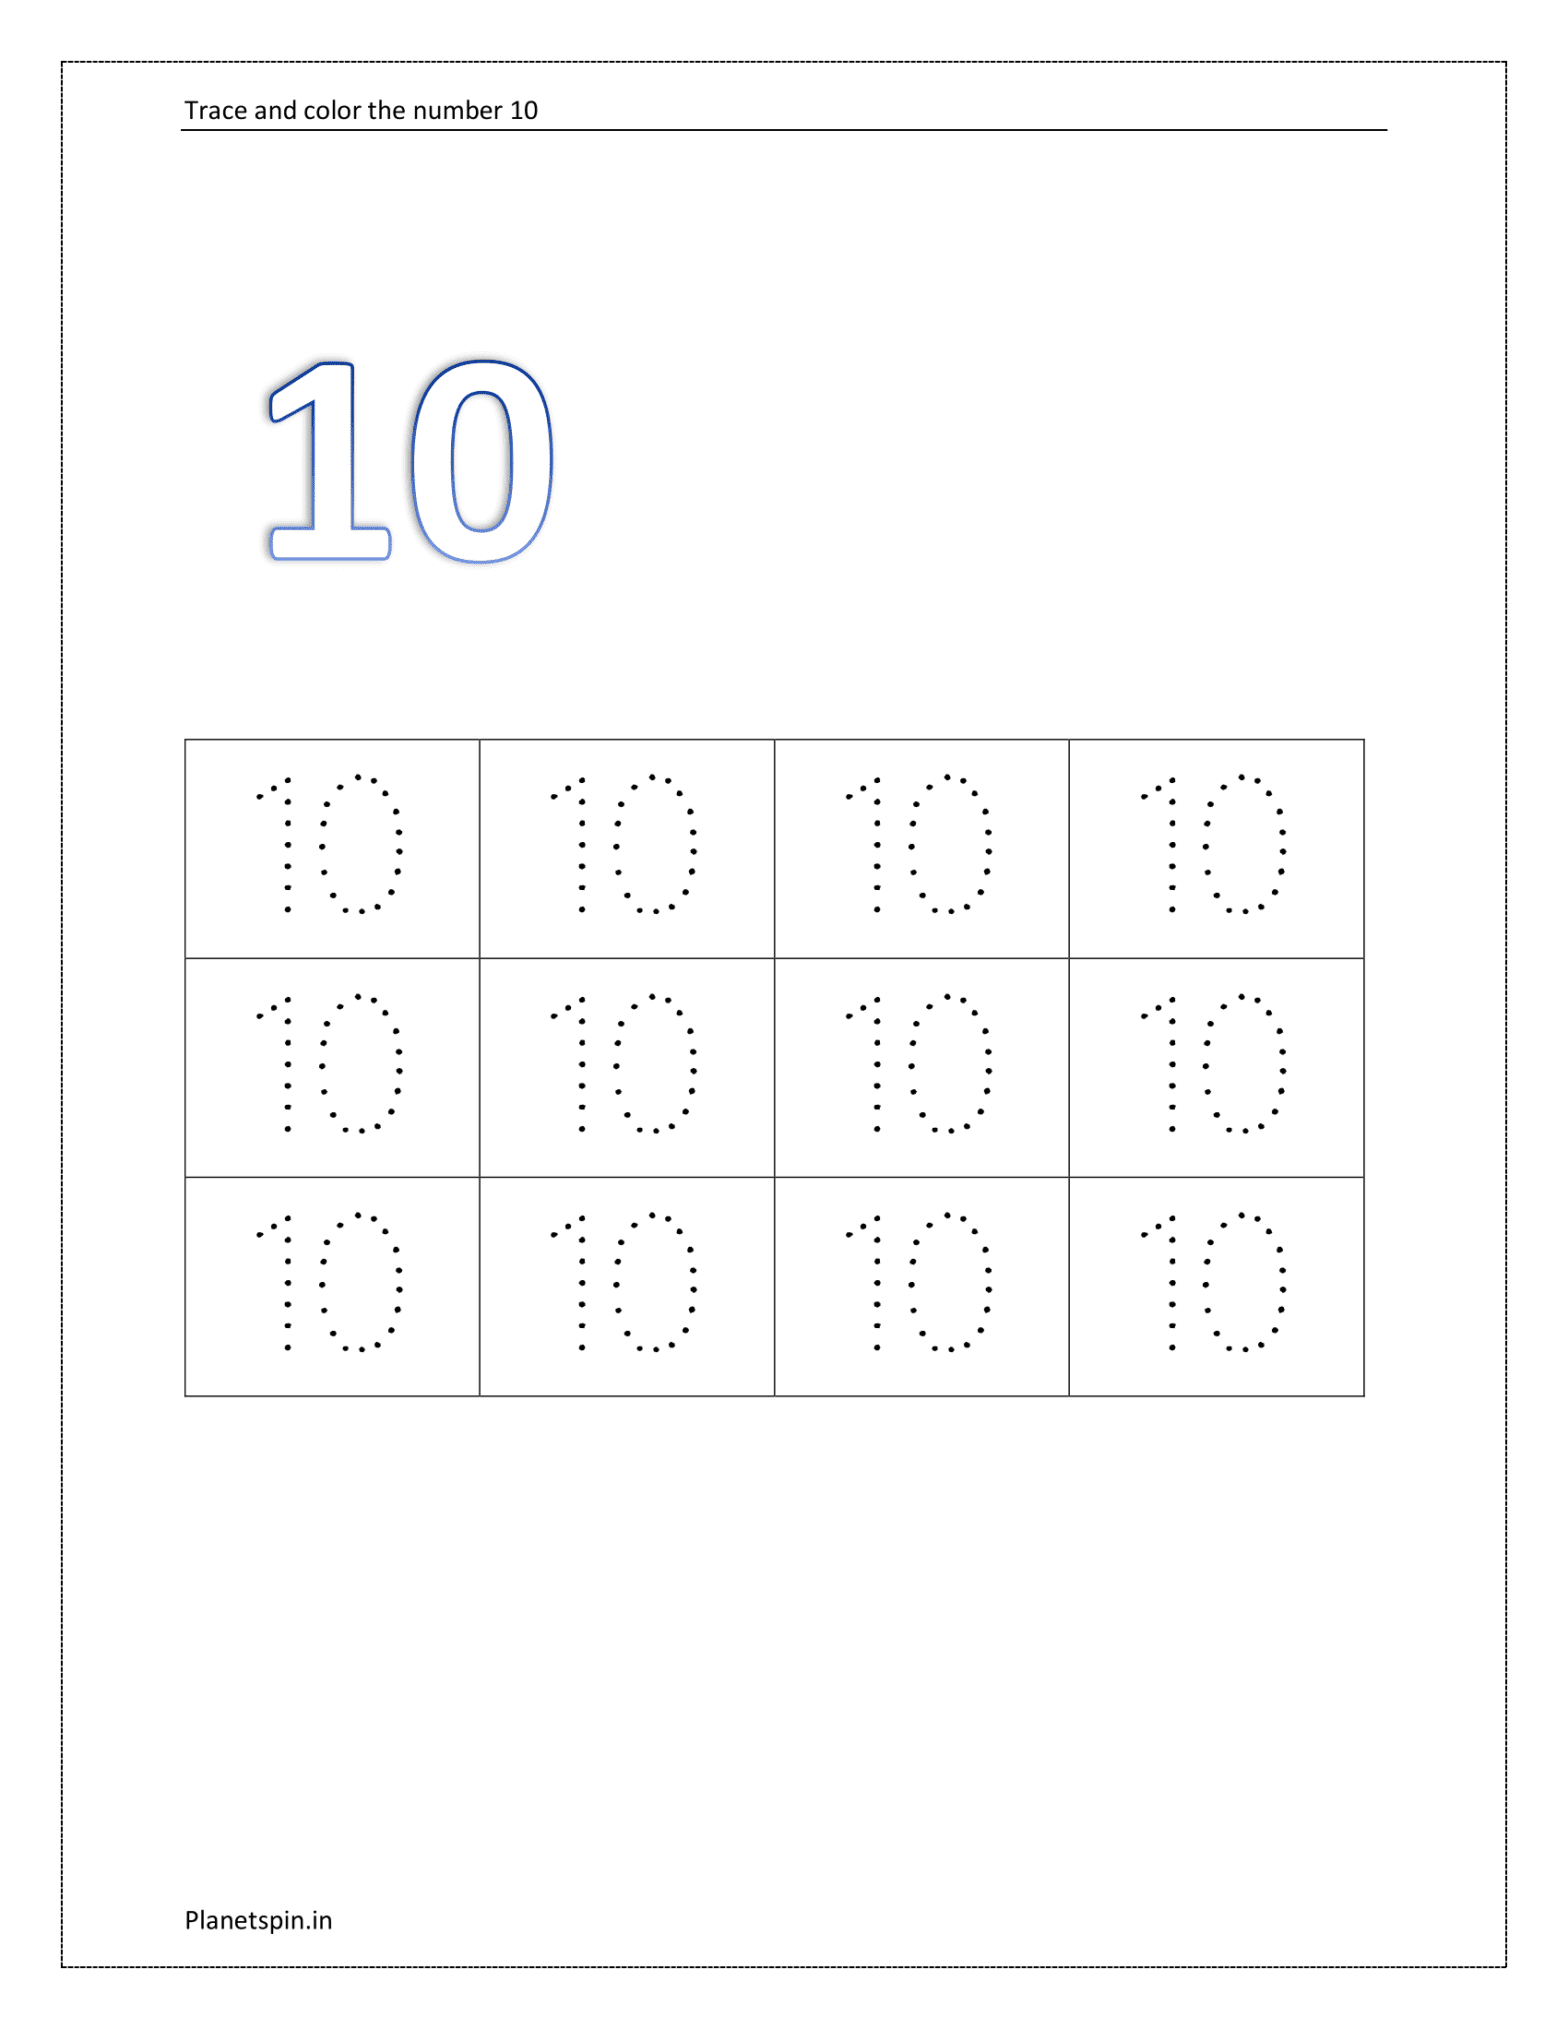 Number 10 worksheet | Planetspin.in